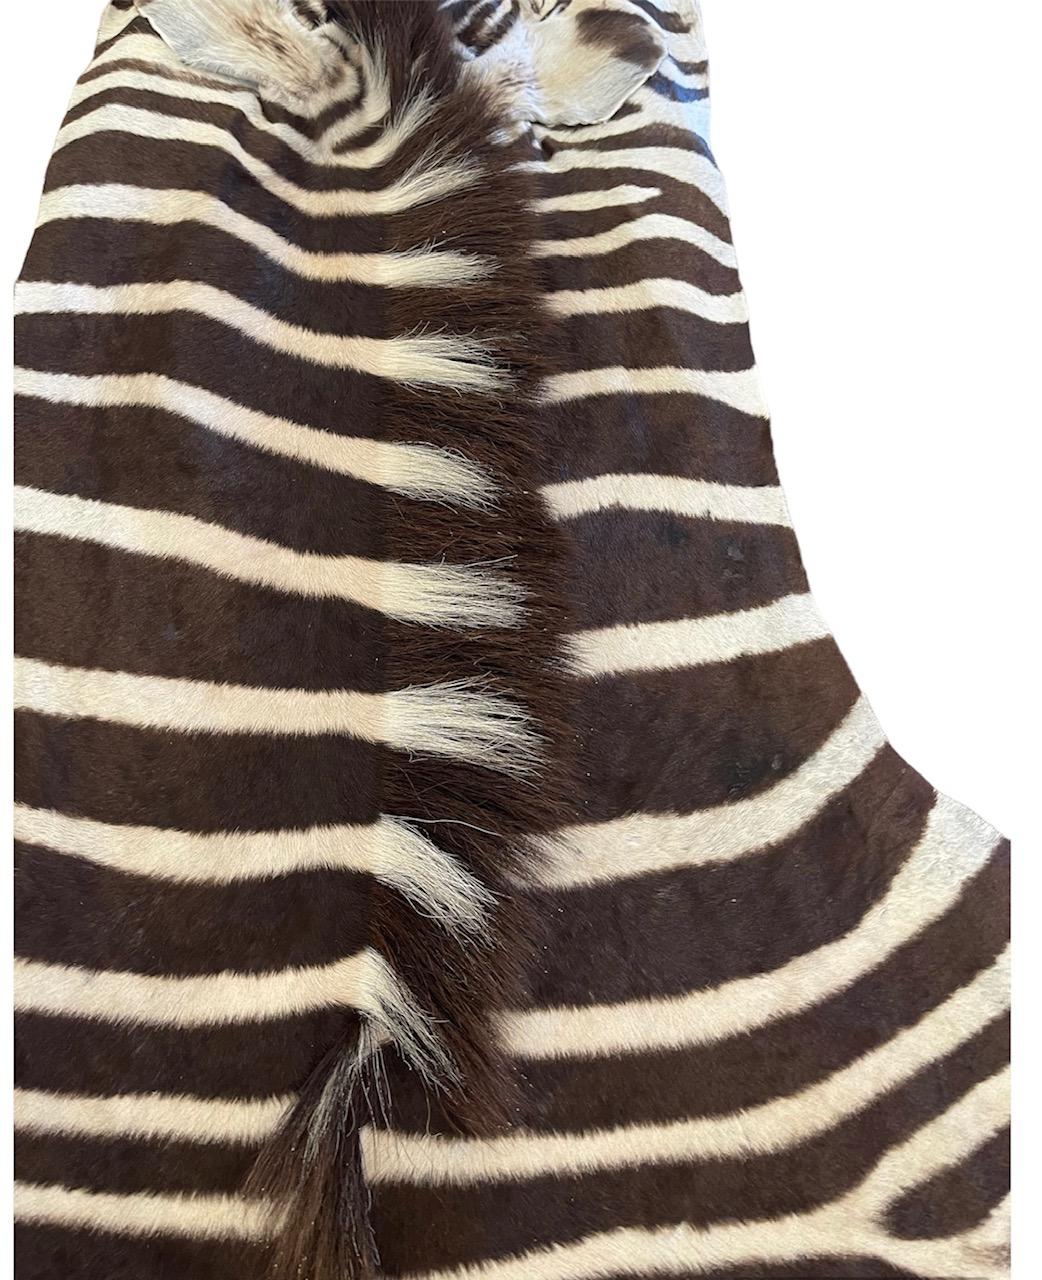 We offer a variety of the finest grade Burchell Zebra Skins straight from South Africa. We hand select each zebra for its uniqueness in color, stripes and natural marks.